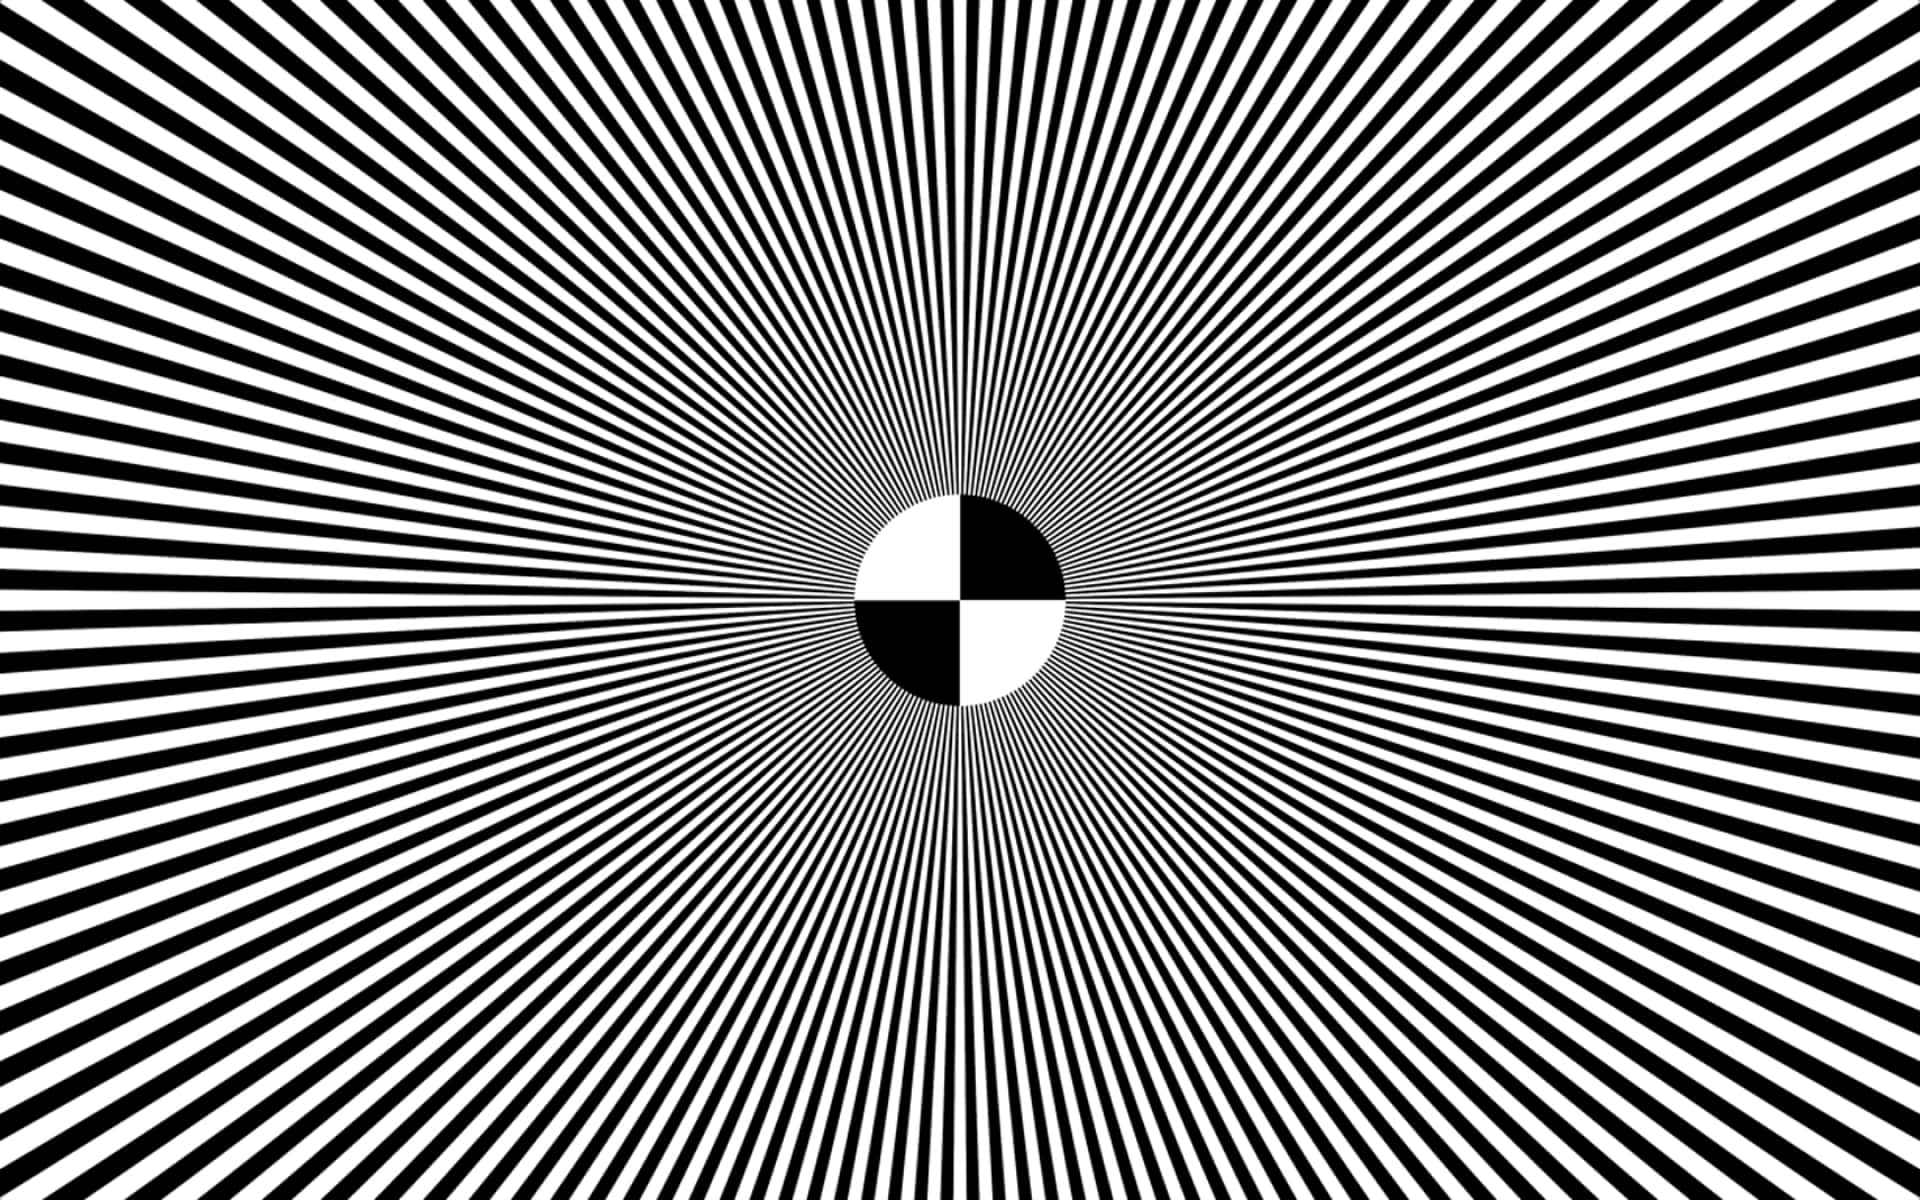 Feel The Depth Of This Cool Optical Illusion Wallpaper